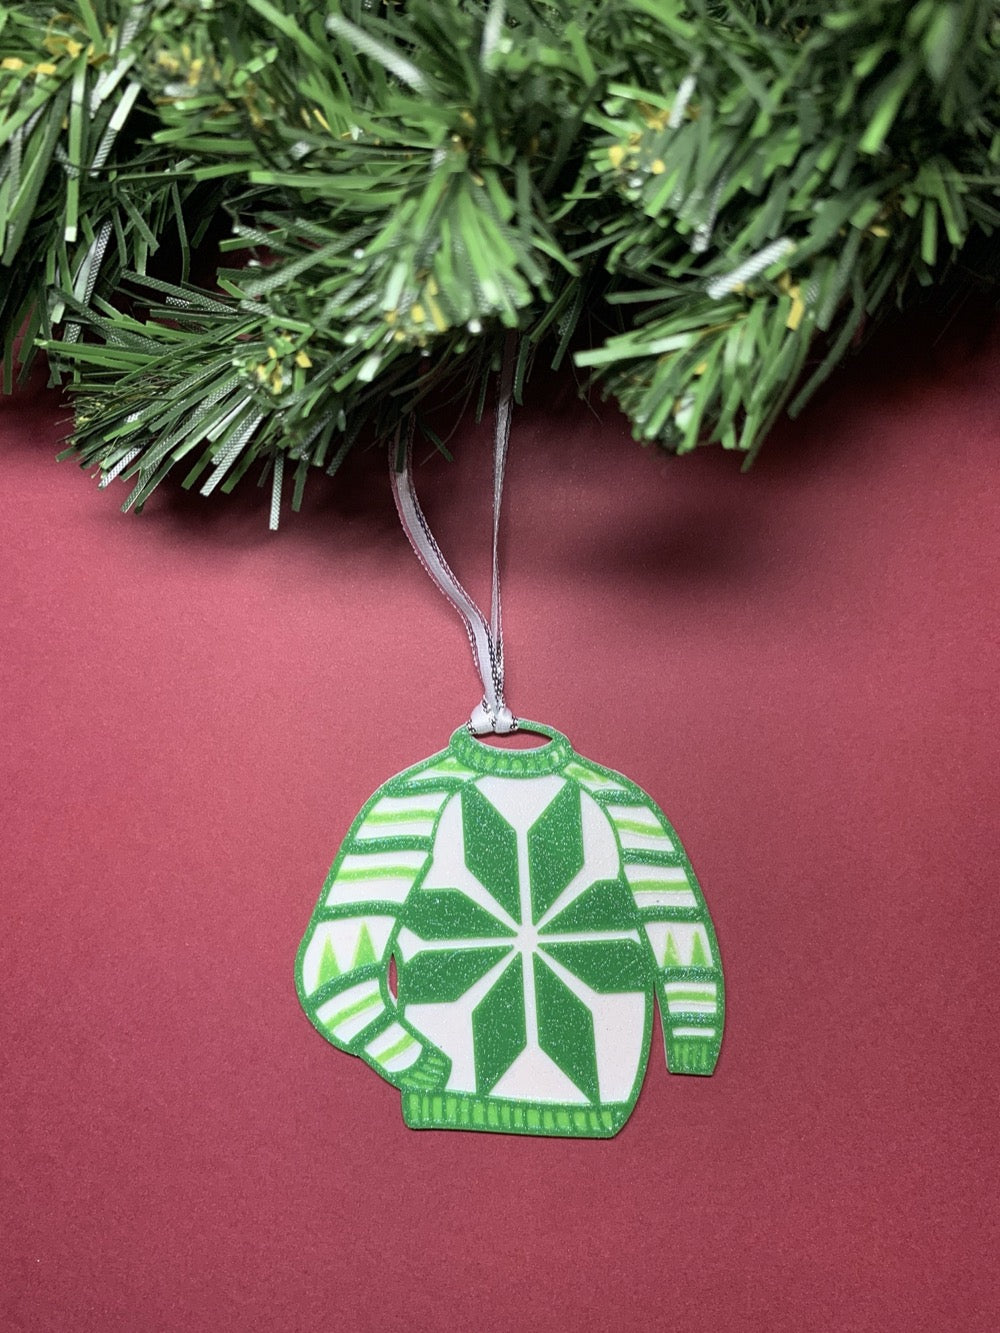 Shown on a red background and hanging from a wreath is a R+D 3D printed ornament. It is in the shape of an ugly sweater with green and white stripes, trees, and a snowflake.